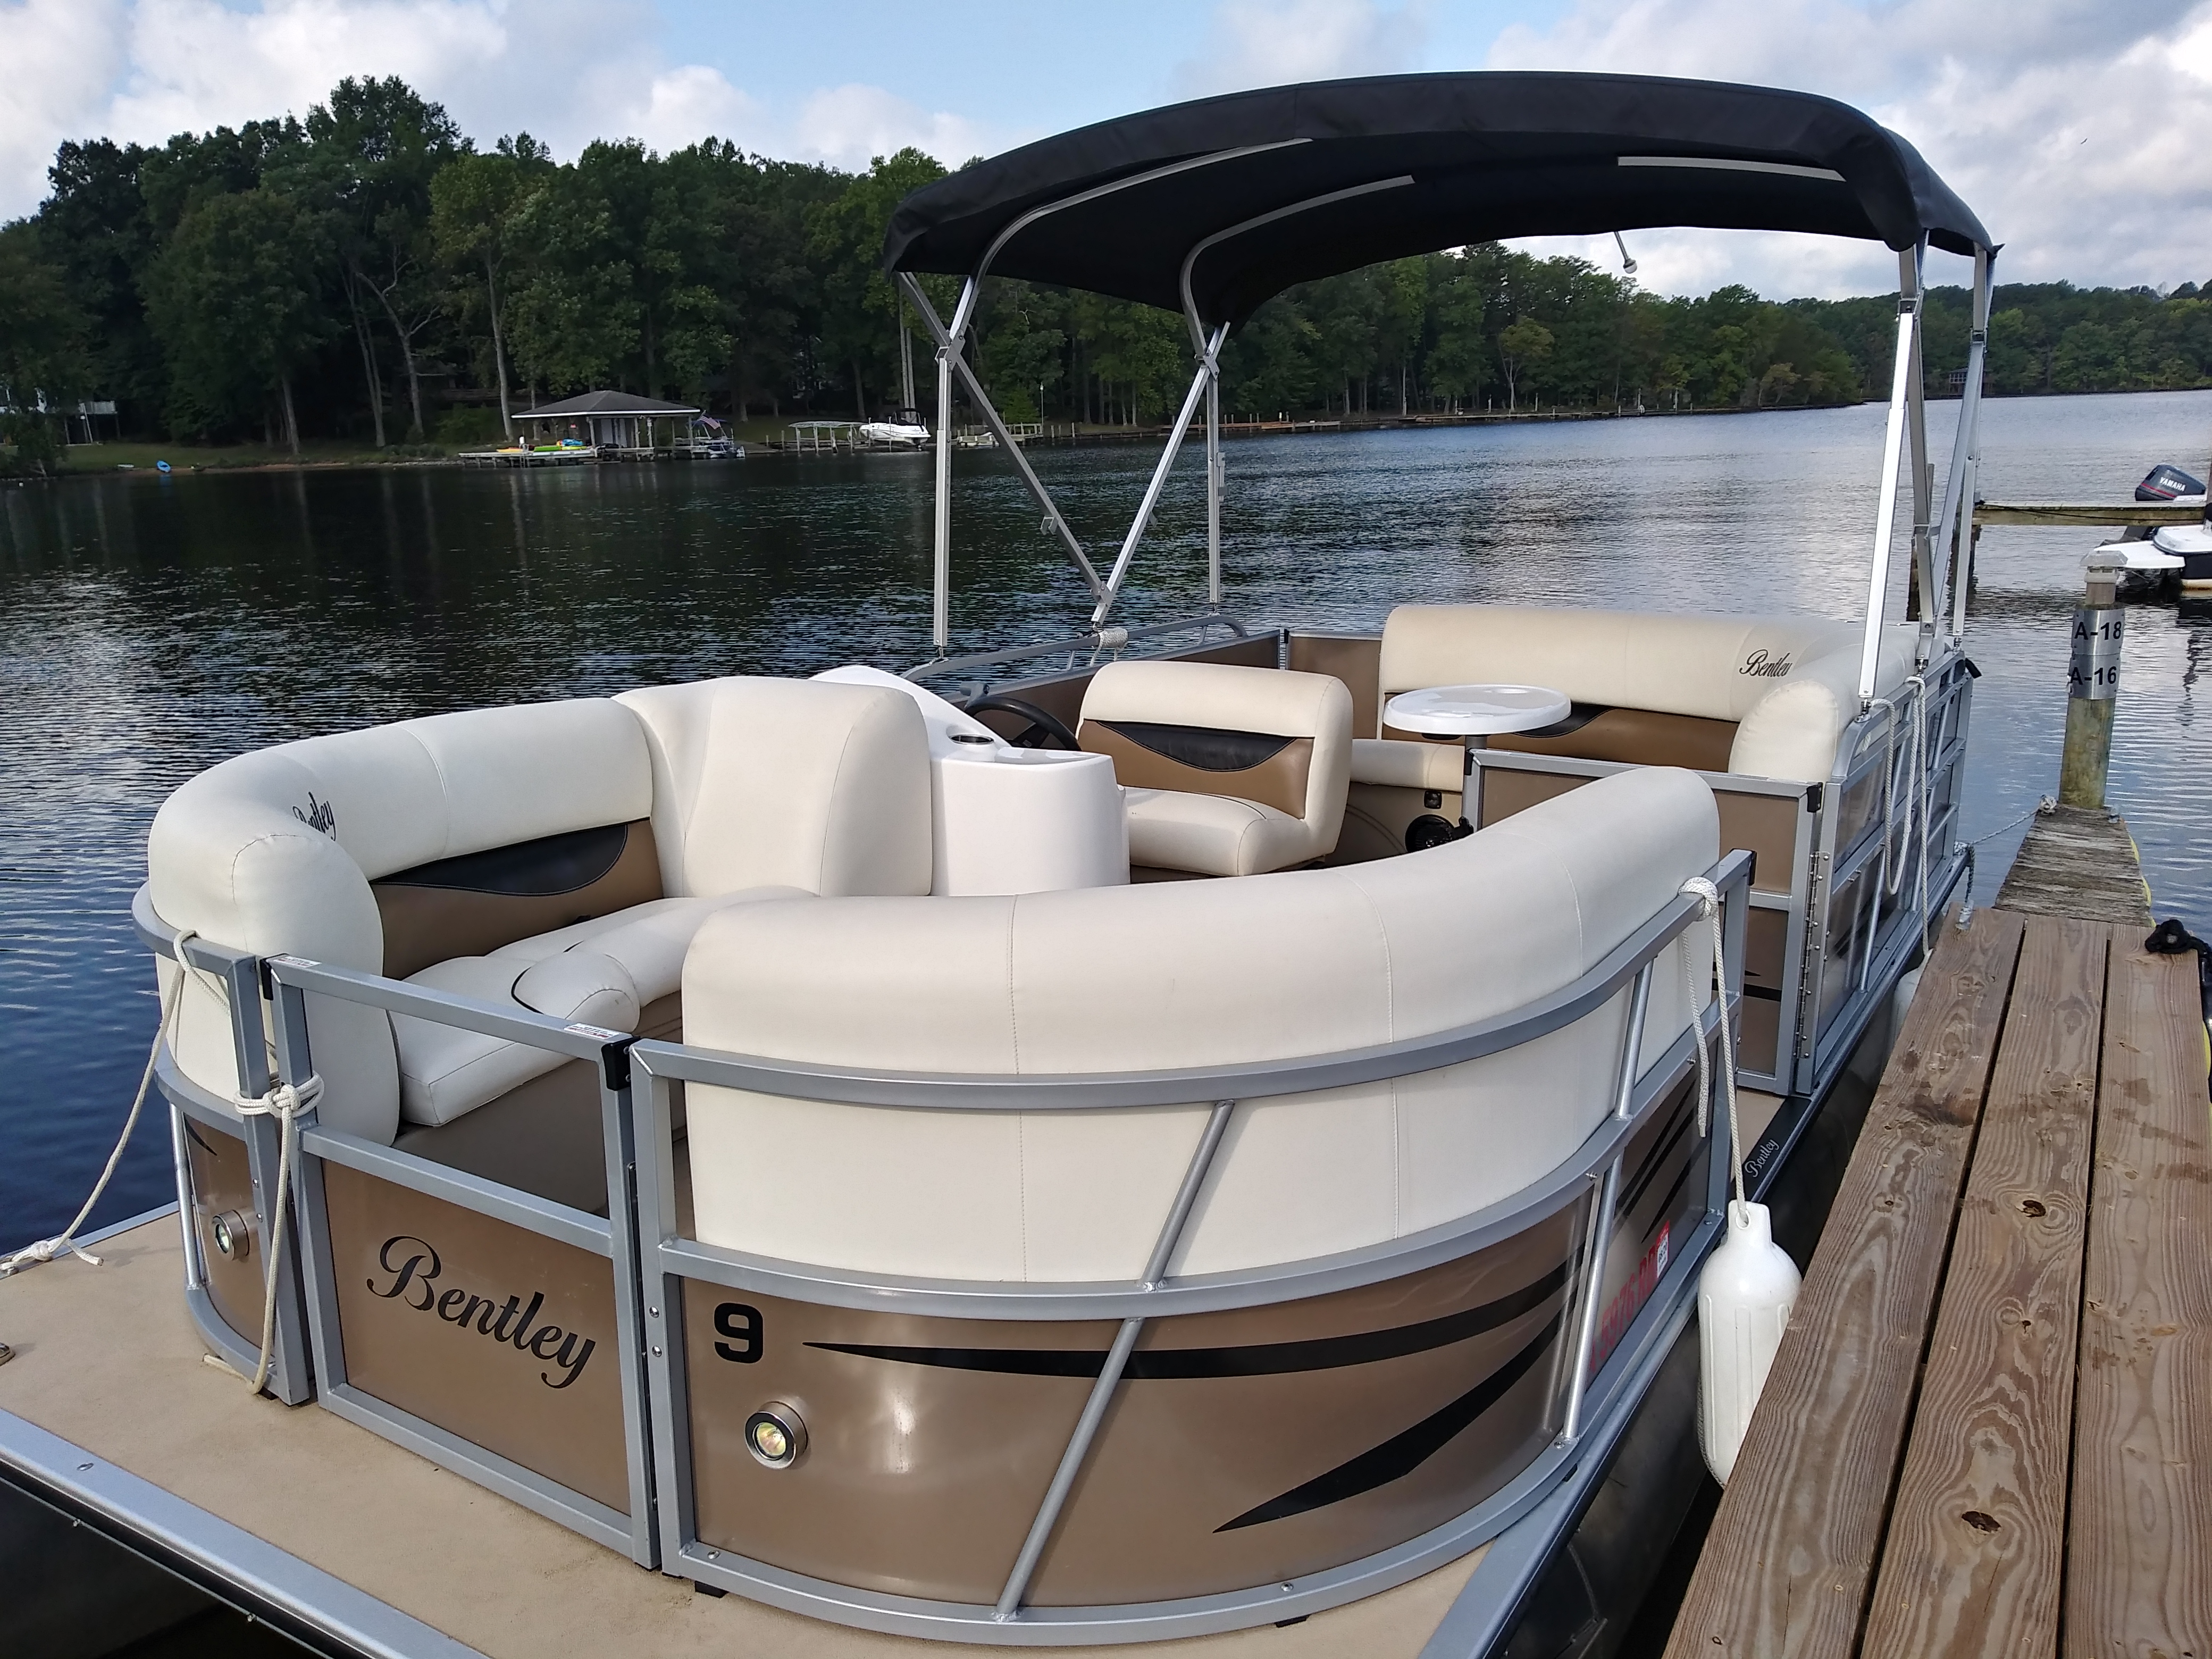 To see why the very best pontoon boats take shape at manitou, take a look a...